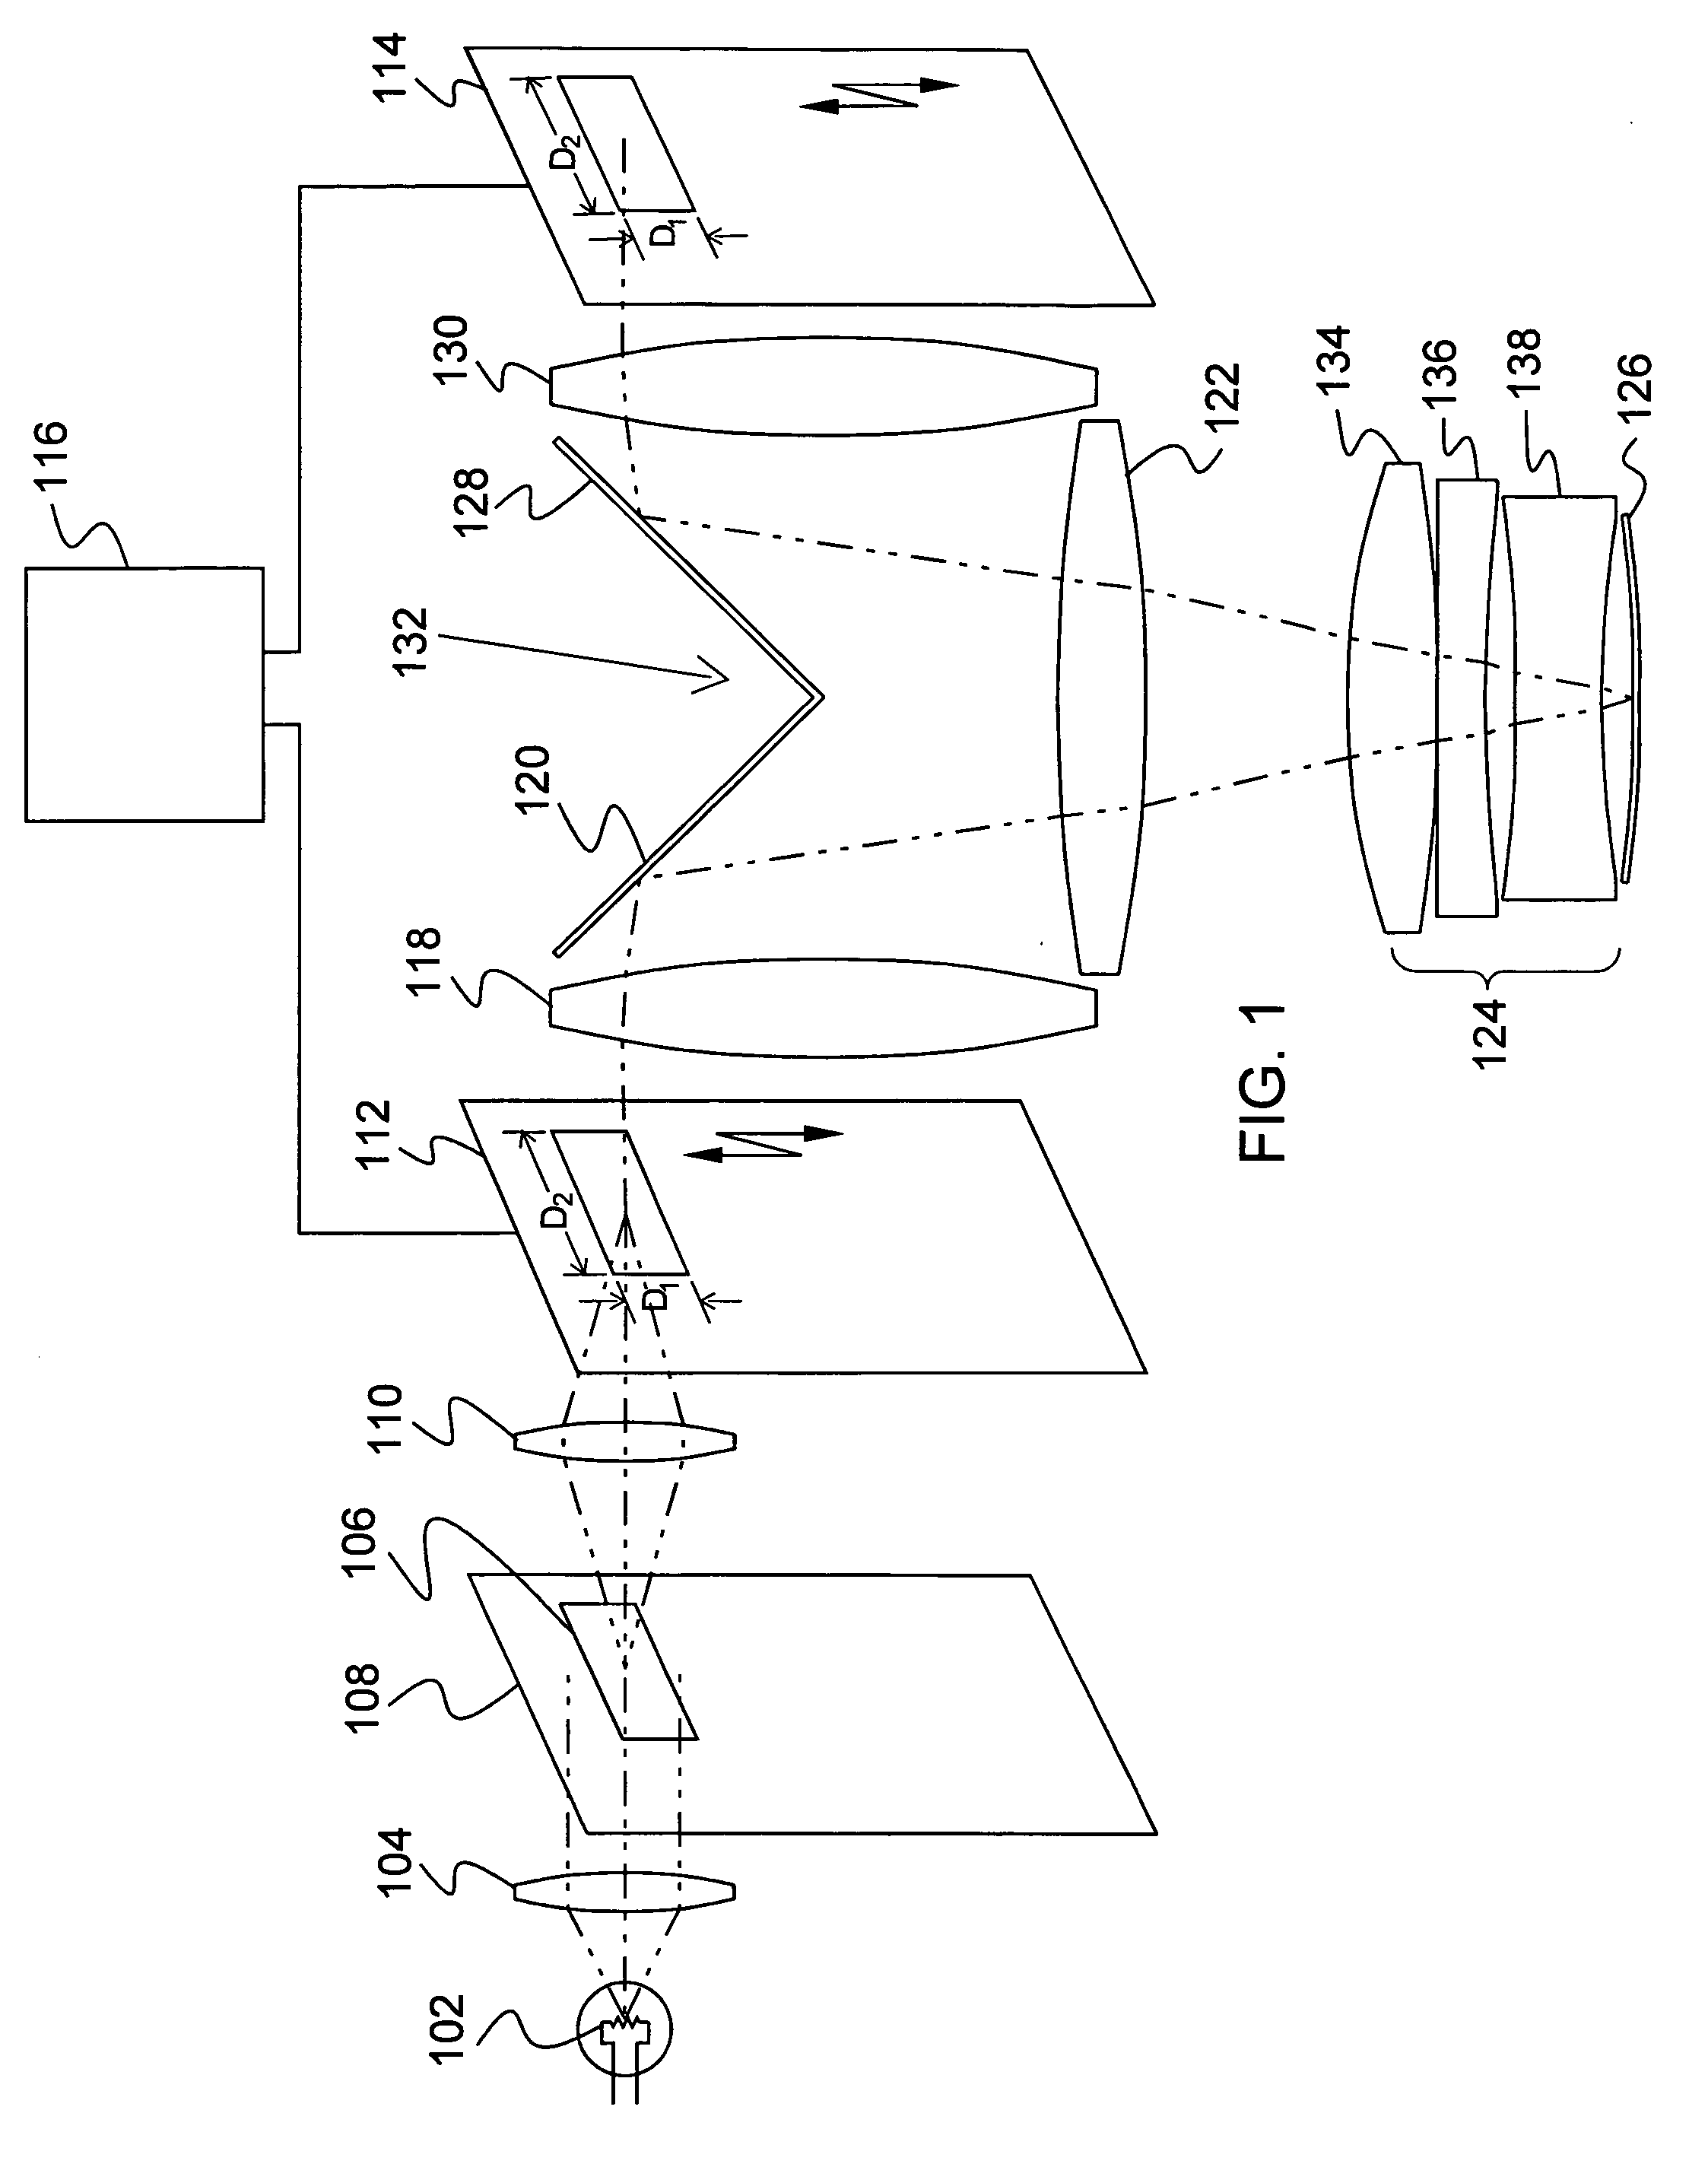 Catadioptric 1x projection system and method